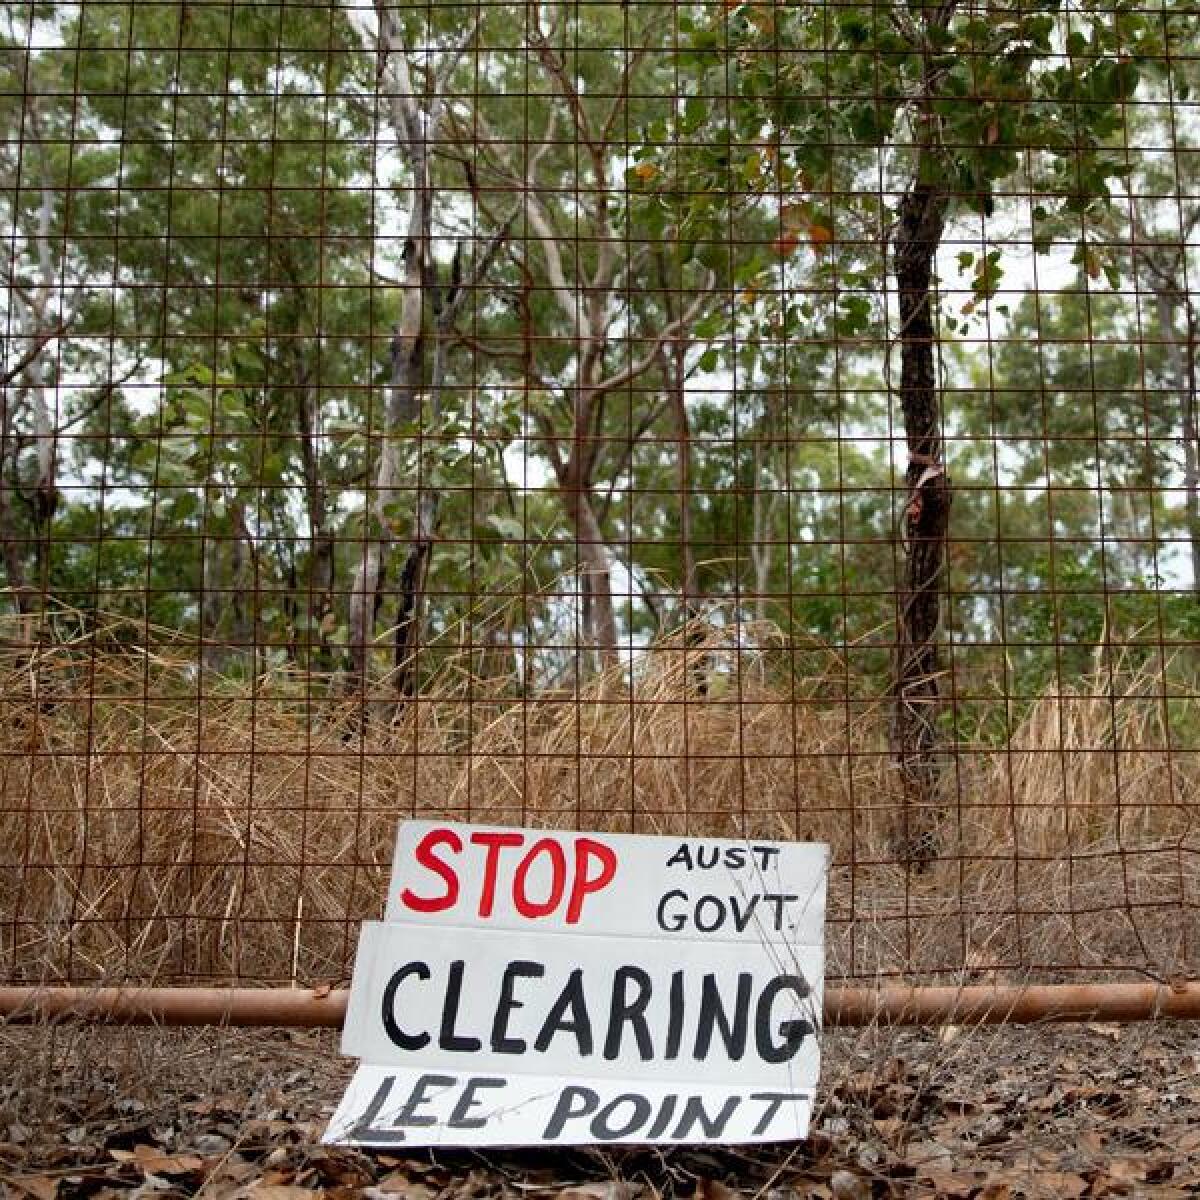 A protest sign at Lee Point on the outskirts of Darwin